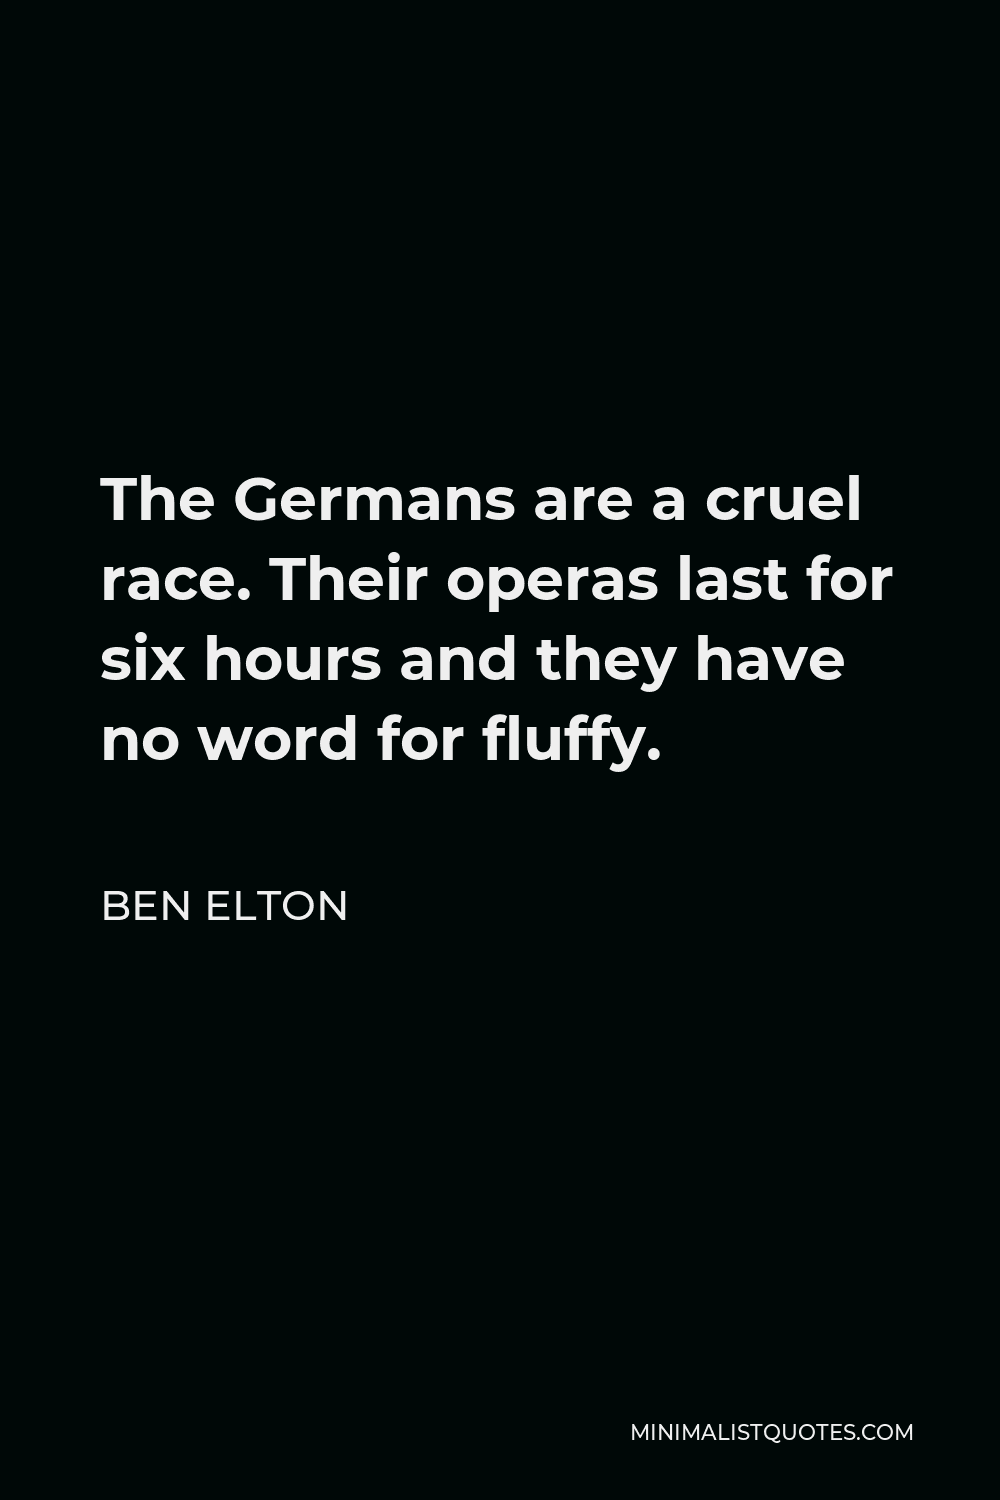 Ben Elton Quote - The Germans are a cruel race. Their operas last for six hours and they have no word for fluffy.